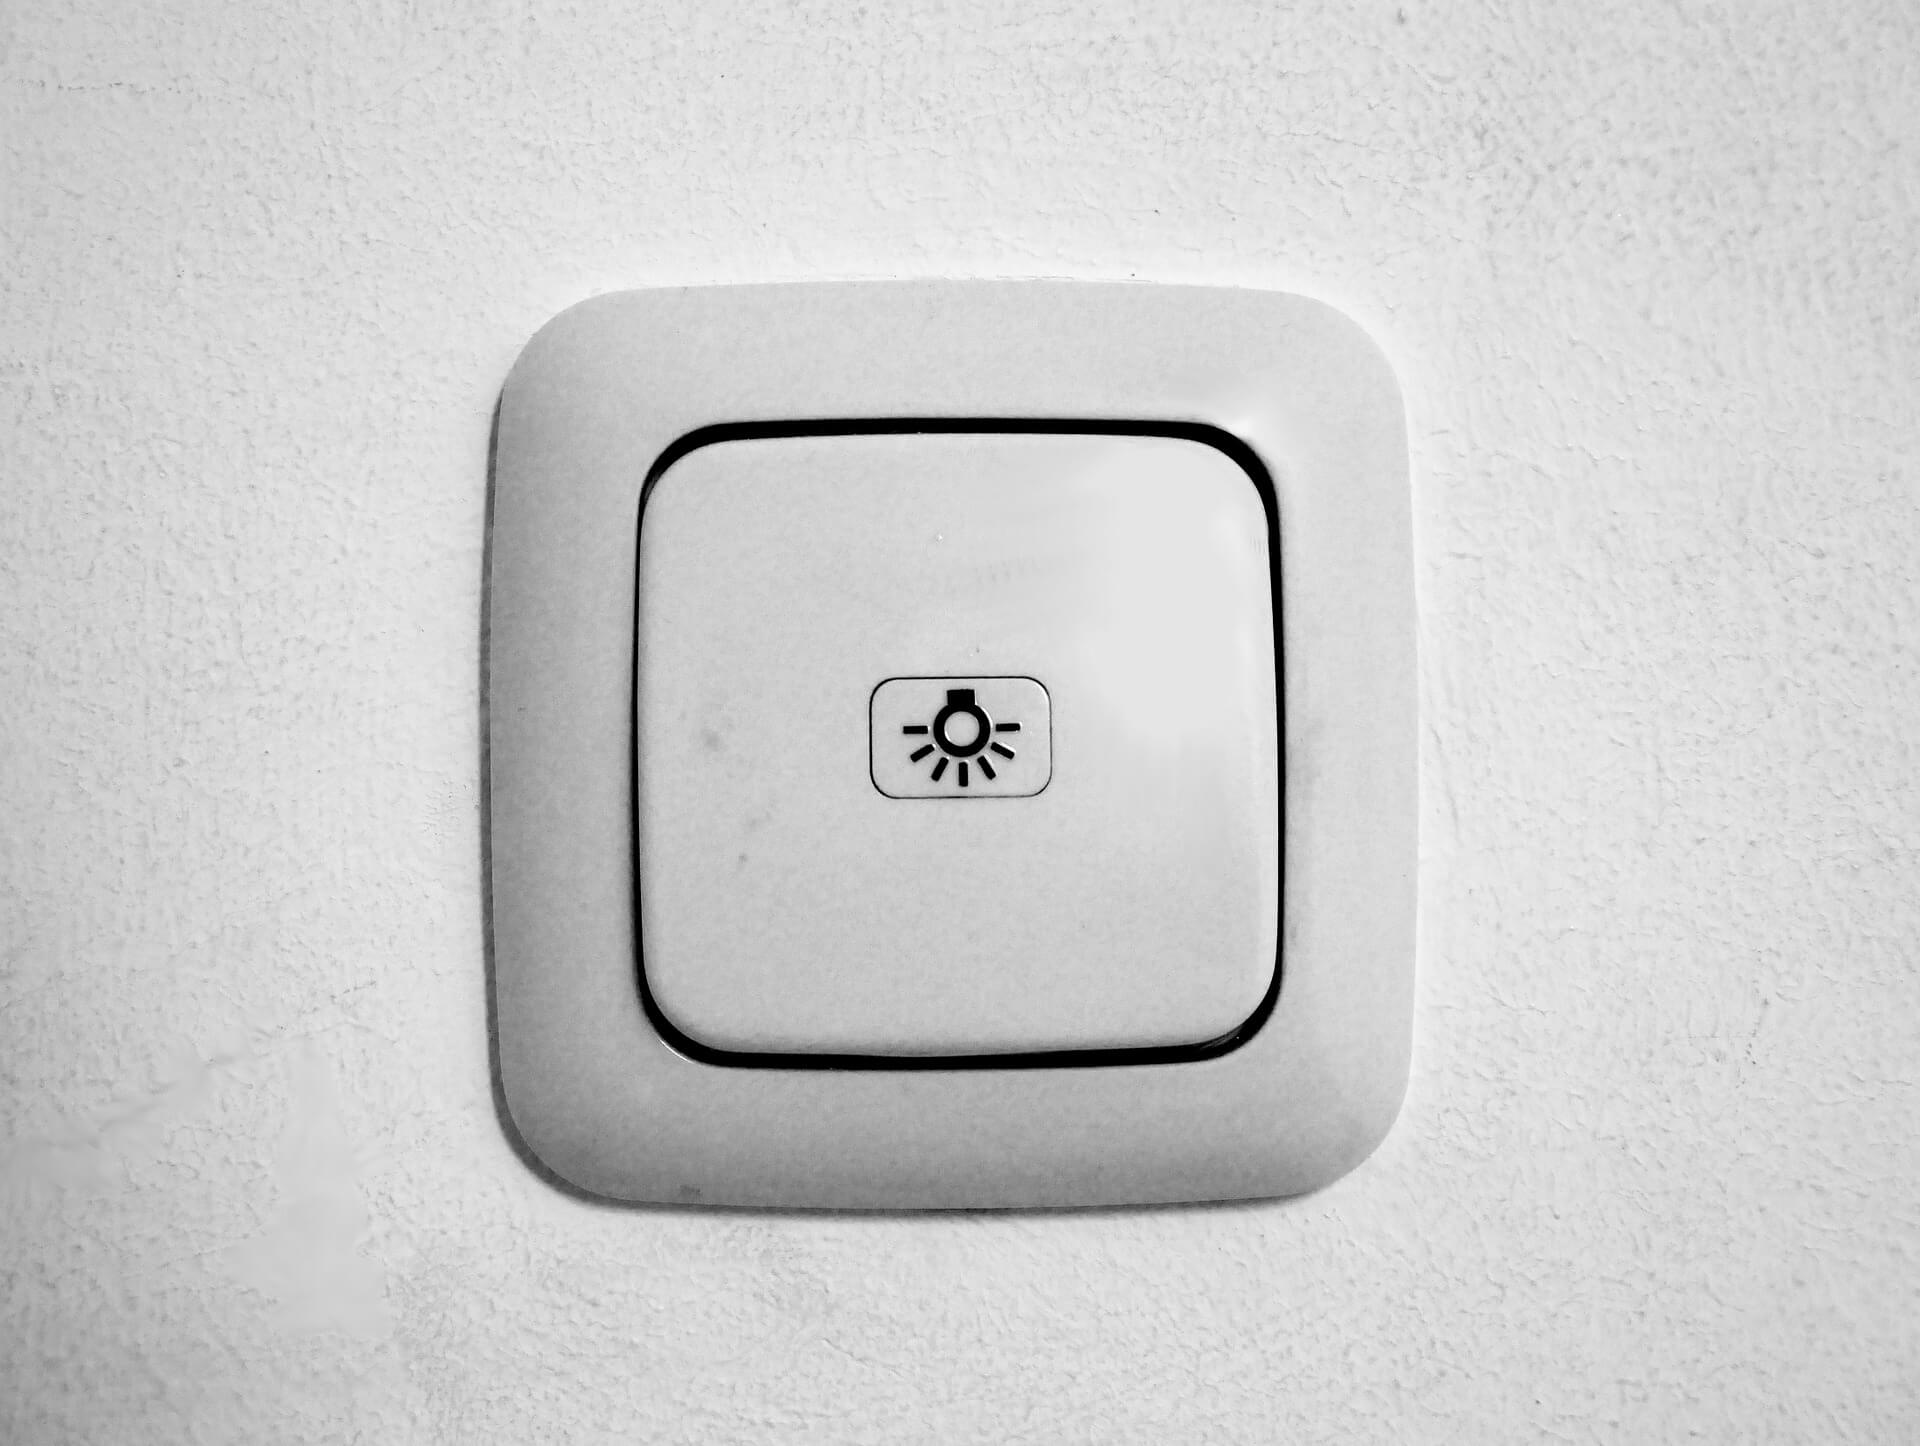 The Convenience of Having a Three-Way Smart Switch